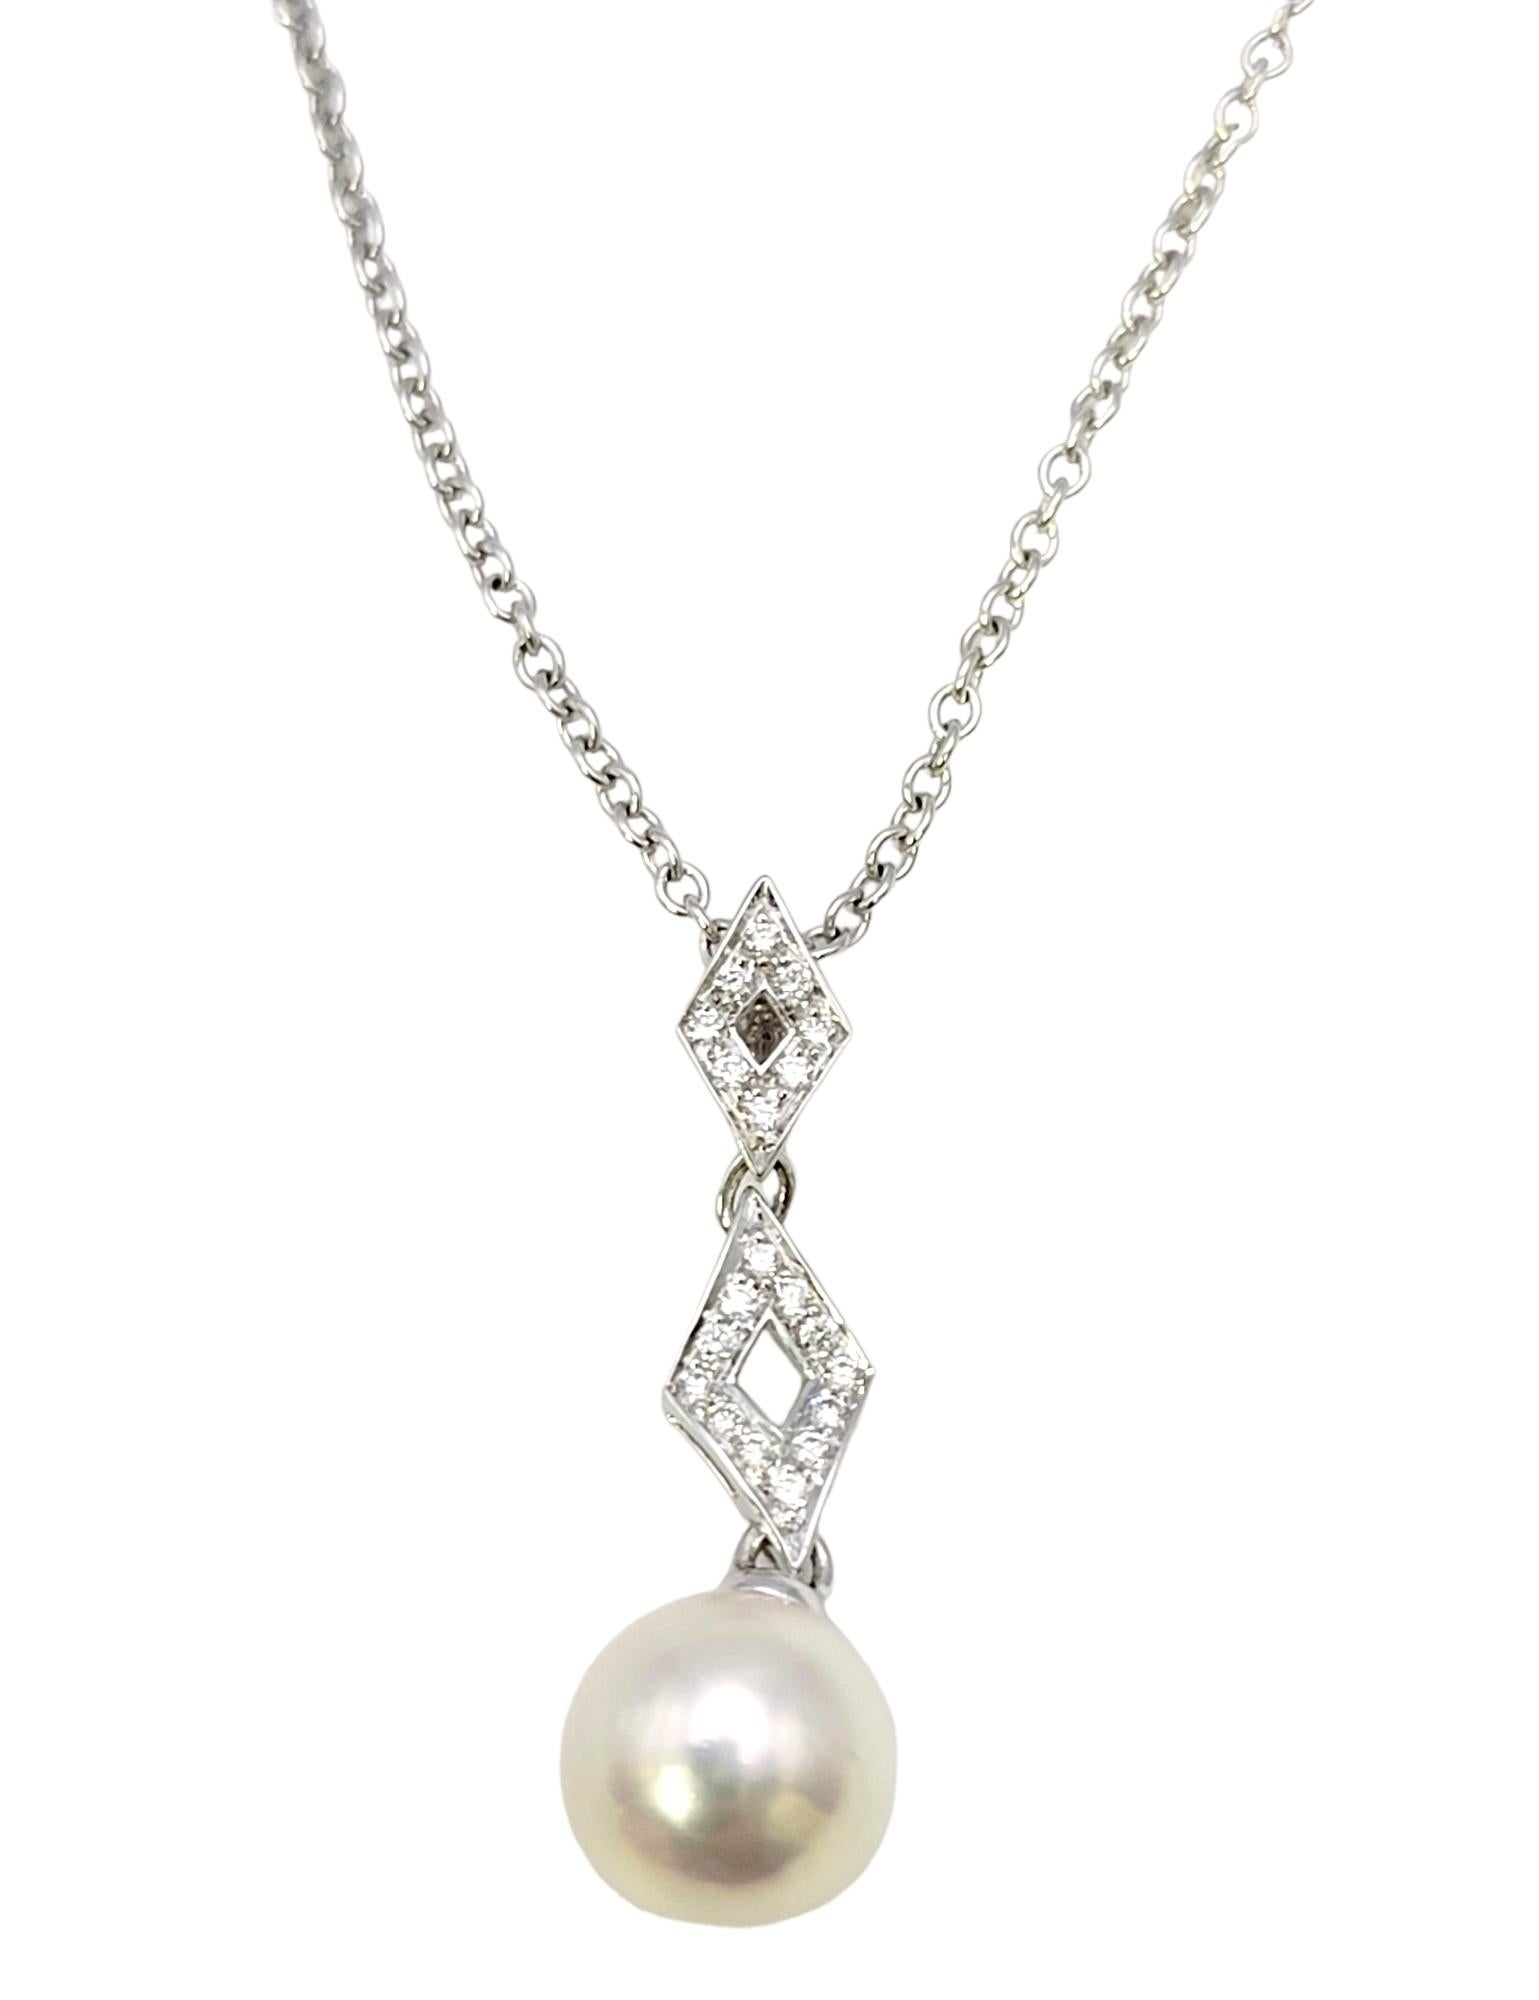 Utterly timeless diamond and pearl necklace by renowned jeweler, Mikimoto. Mikimoto is an international luxury company, recognized as the first producer of cultured pearl jewelry. The worldwide brand is known for its superior craftsmanship,